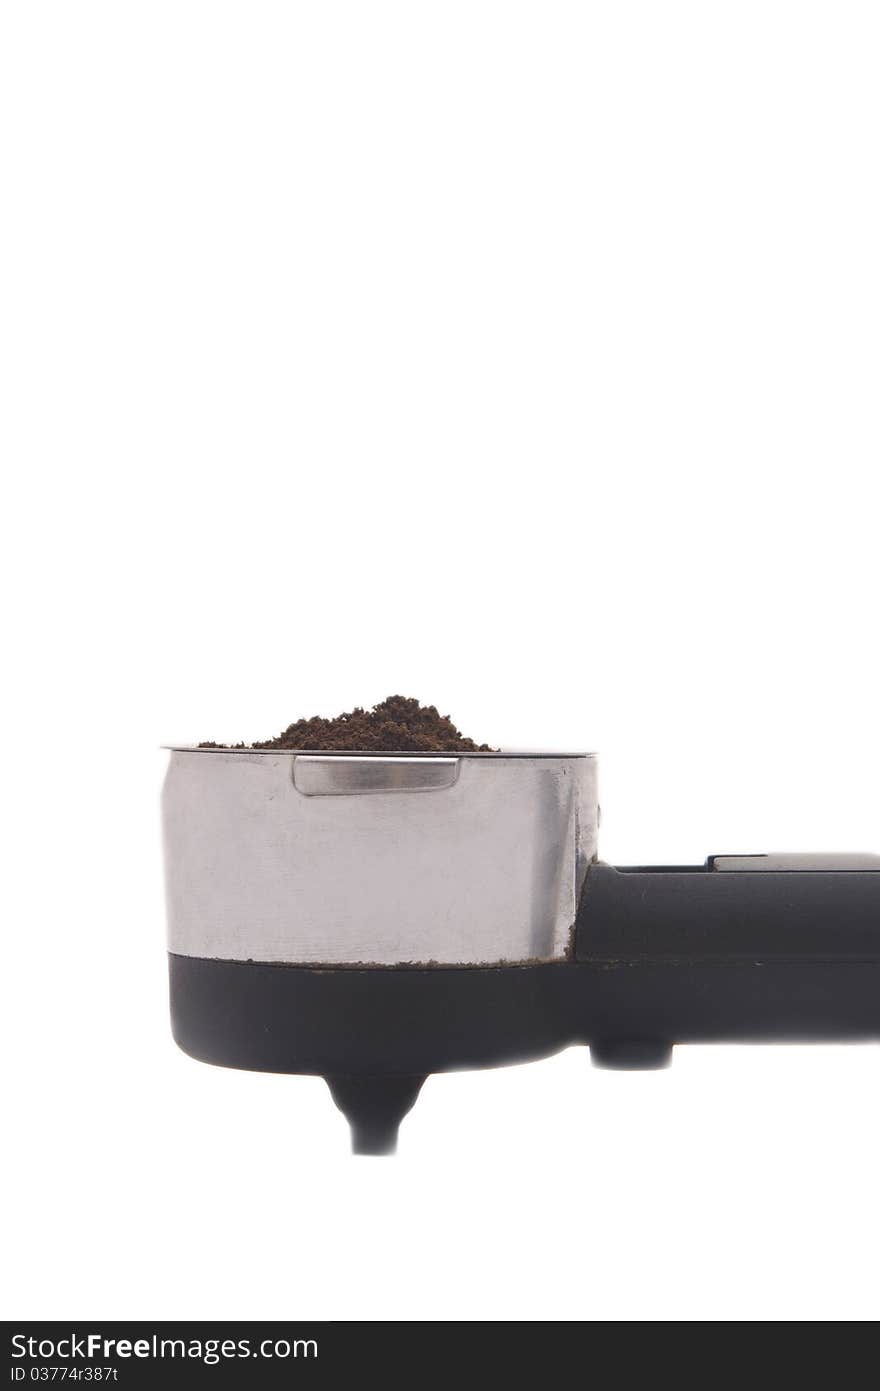 Portion of natural, ground coffee on a white background